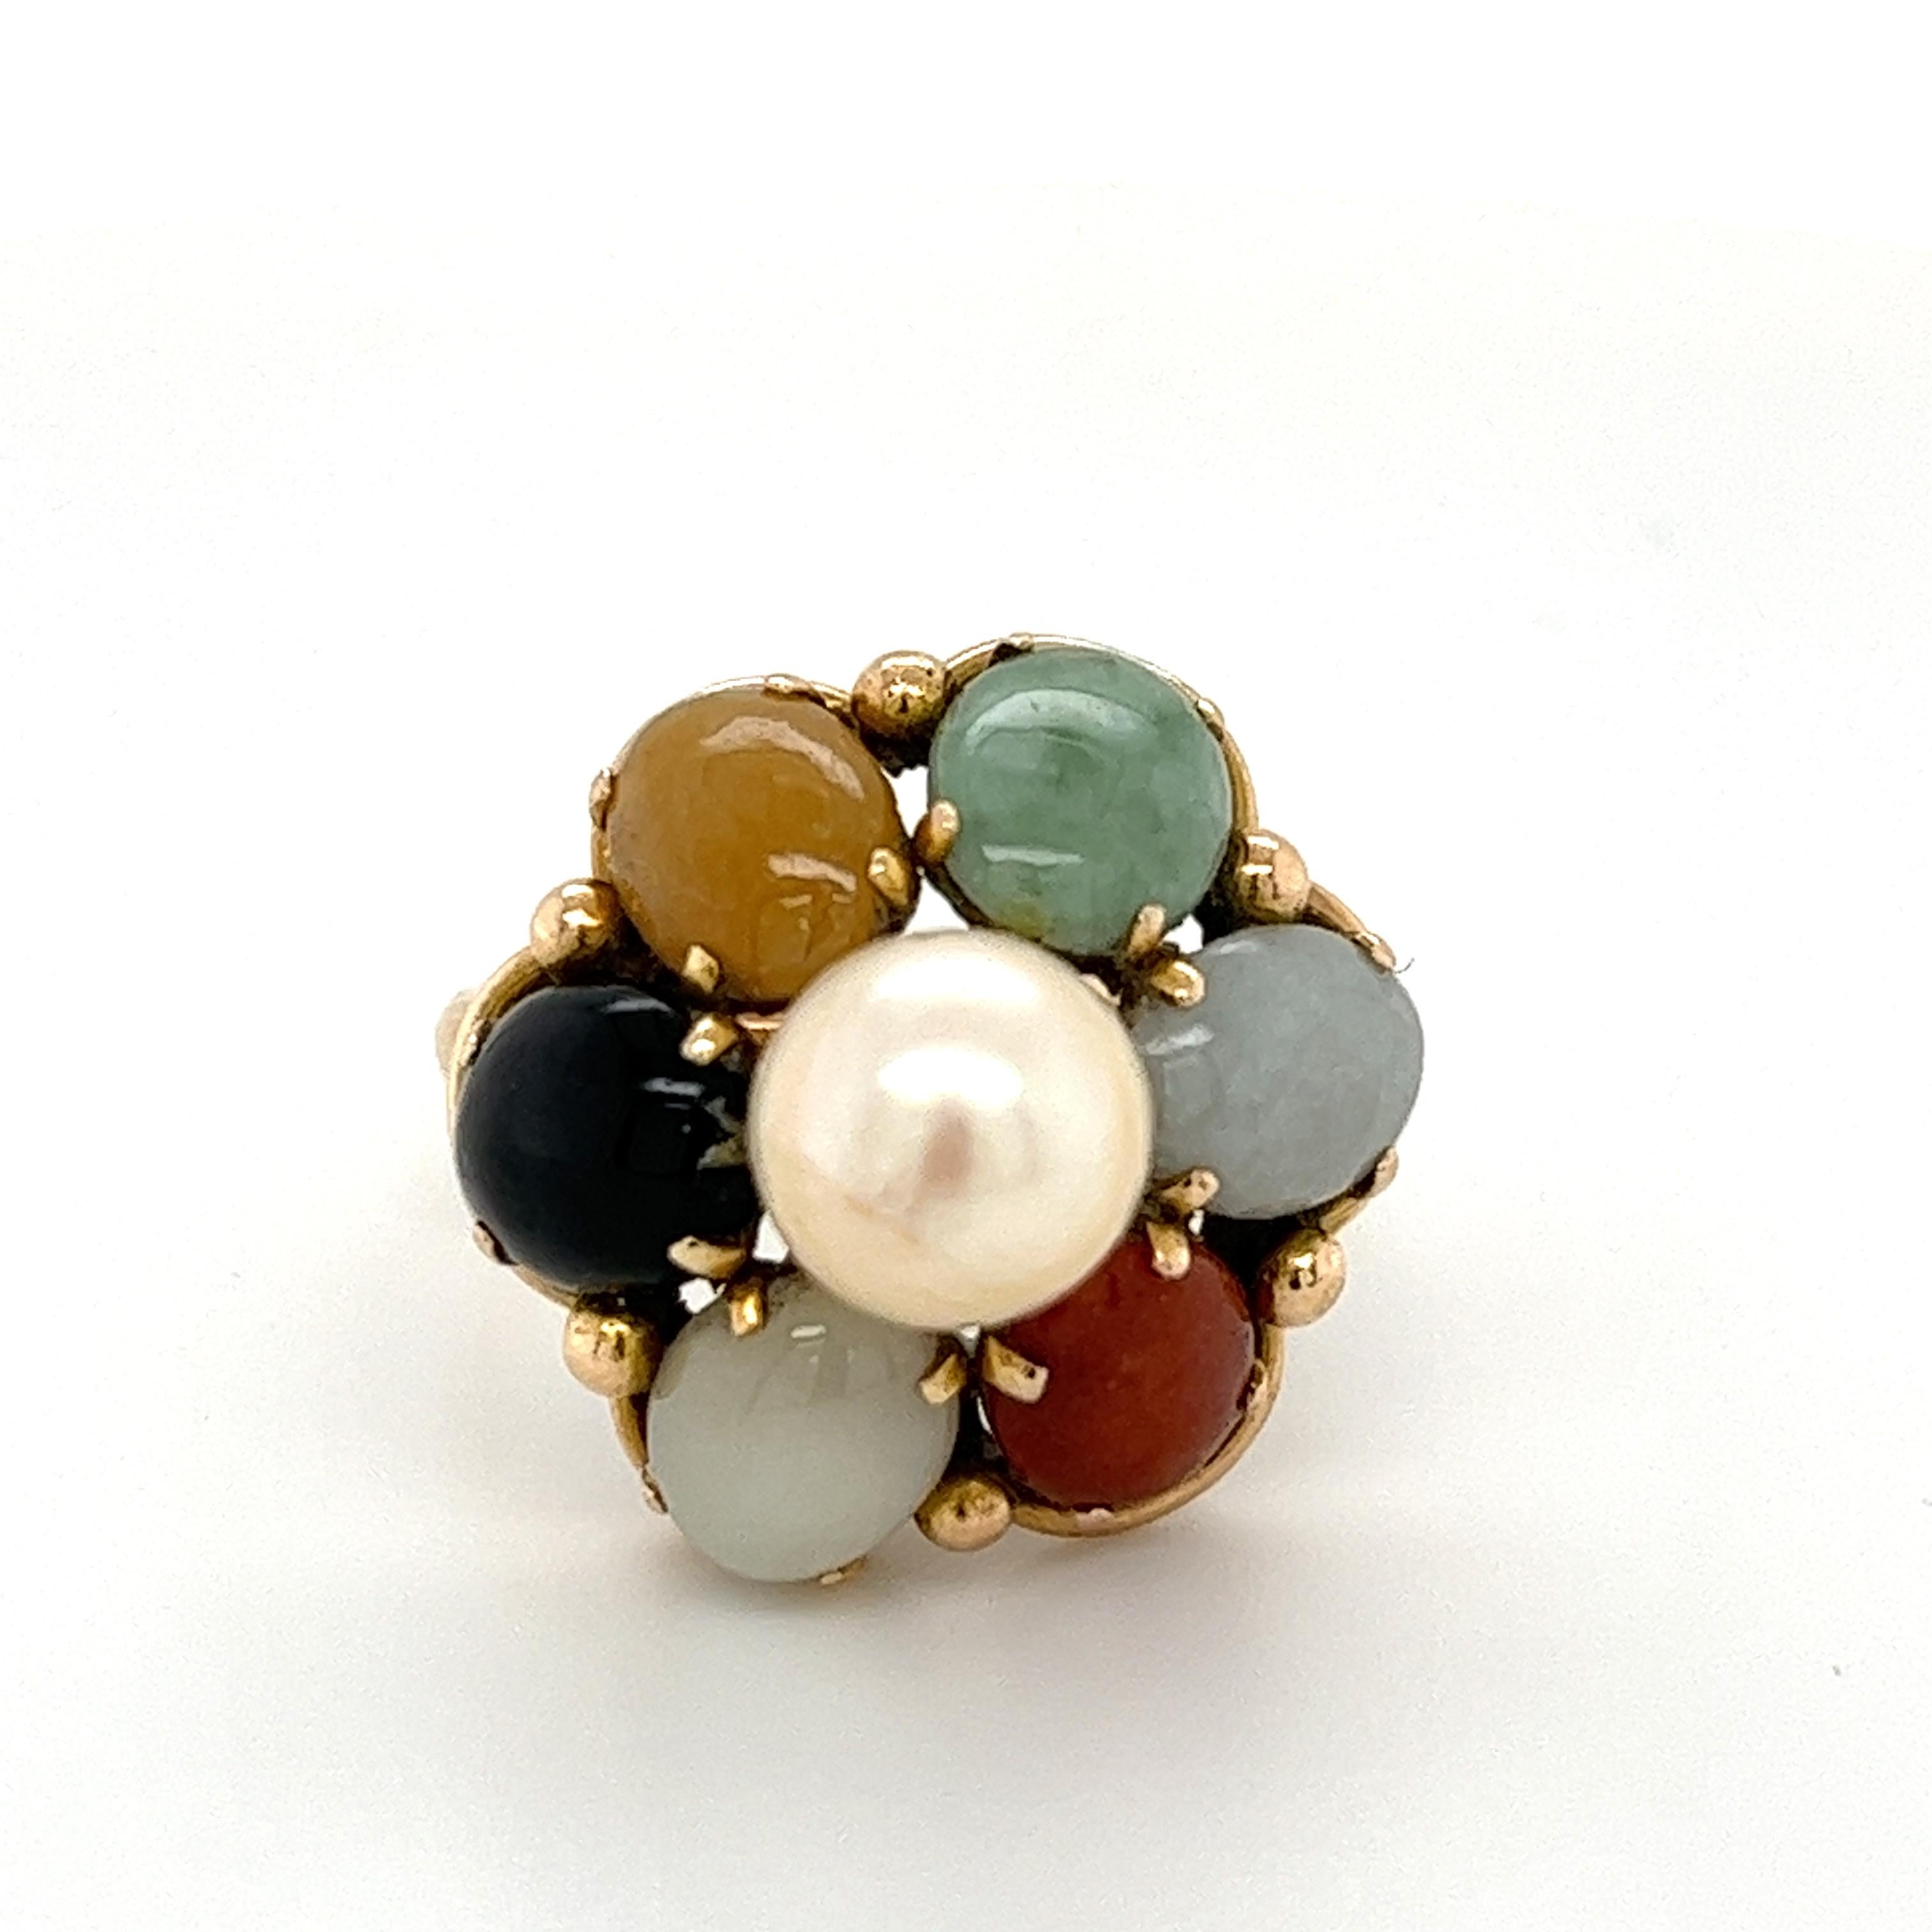 Art Nouveau Multi Gem Flower Cluster Ring with Cabochon Cut Stones in 14k Gold